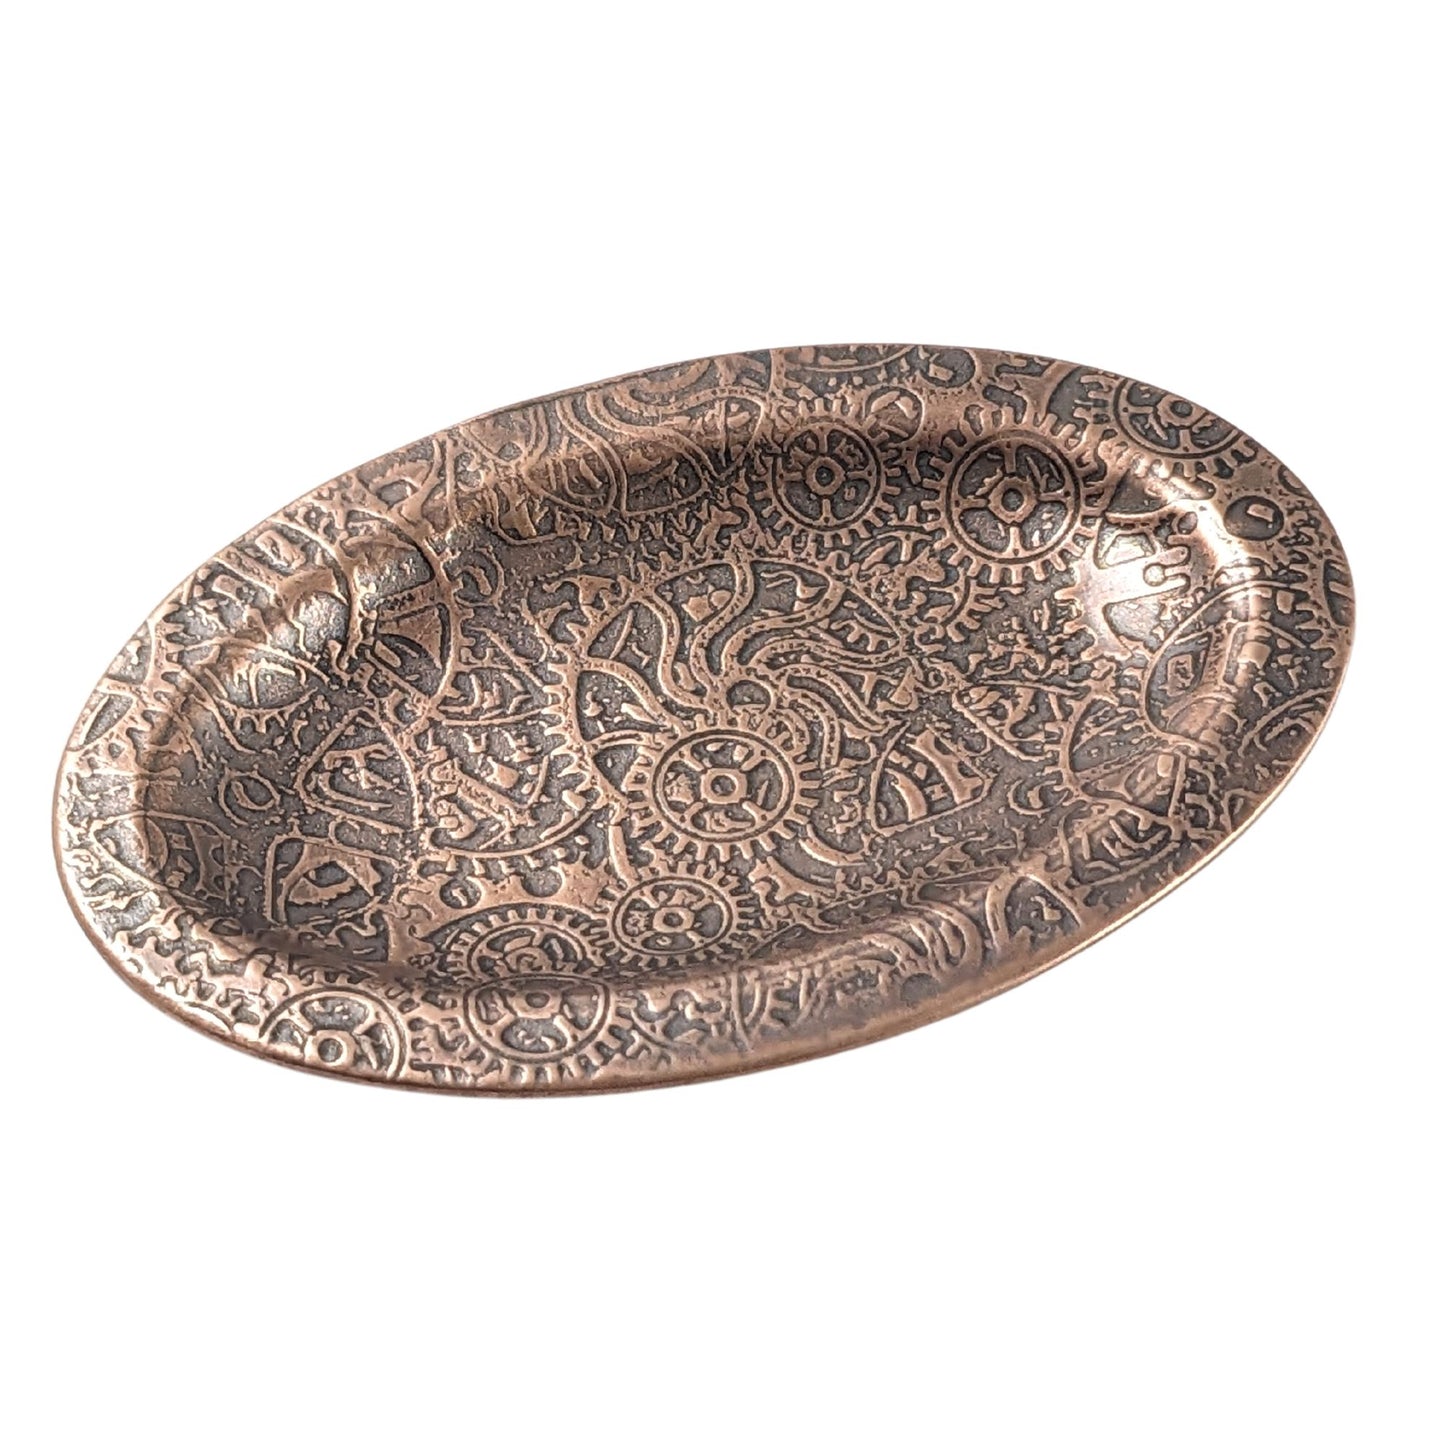 An oval copper ring dish with a raised edge. The dish has an impressed pattern of steampunk style gears and cogs.